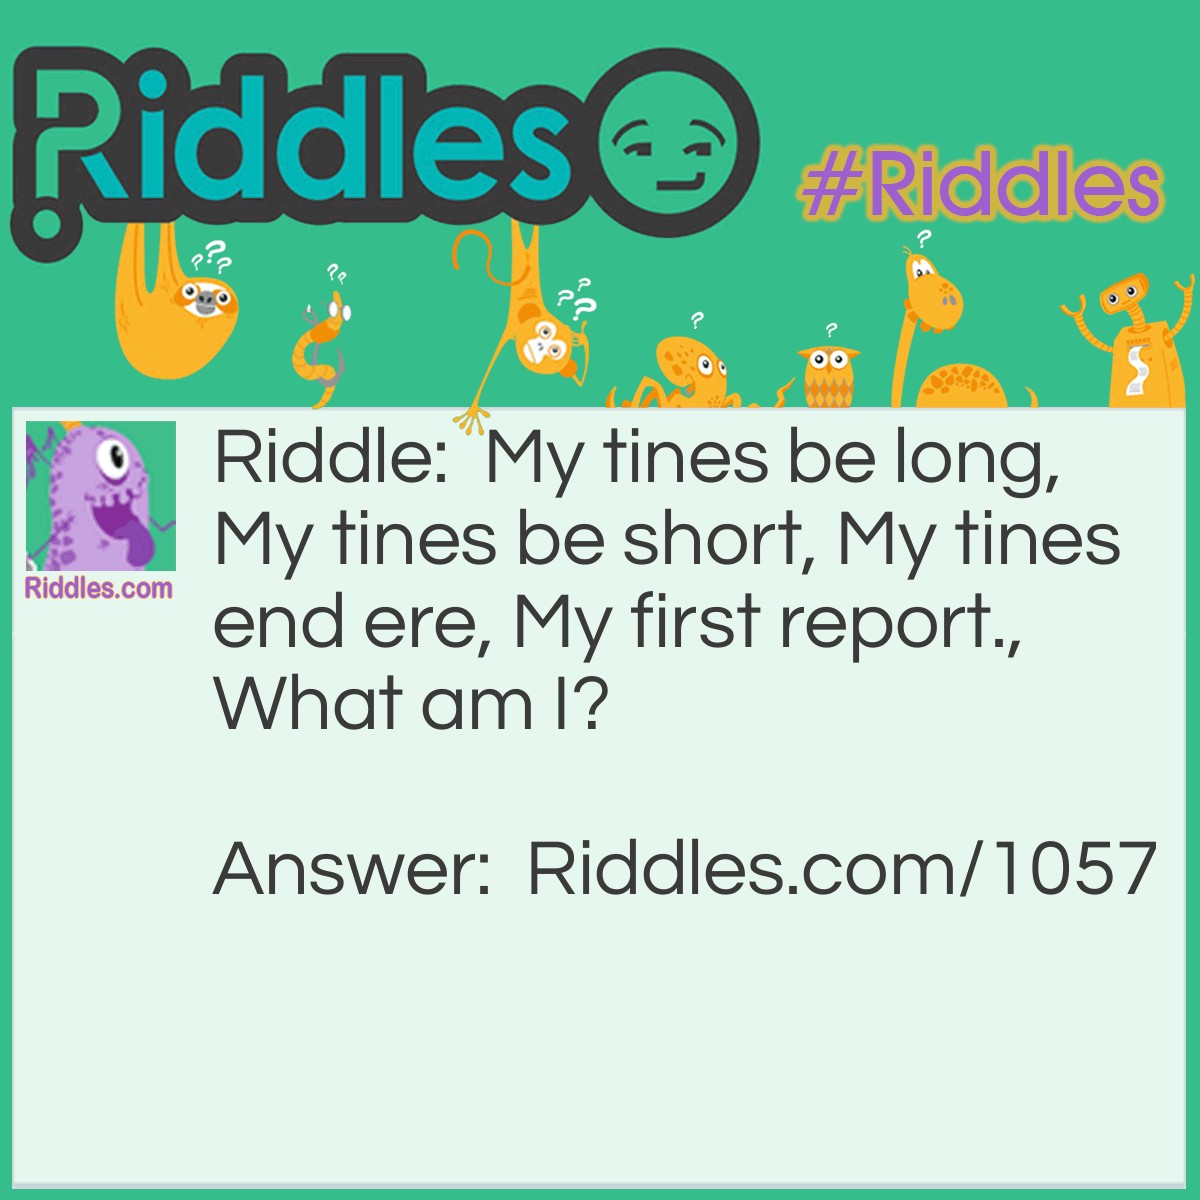 Riddle: My tines be long, My tines be short, My tines end ere, My first report., What am I? Answer: lightning